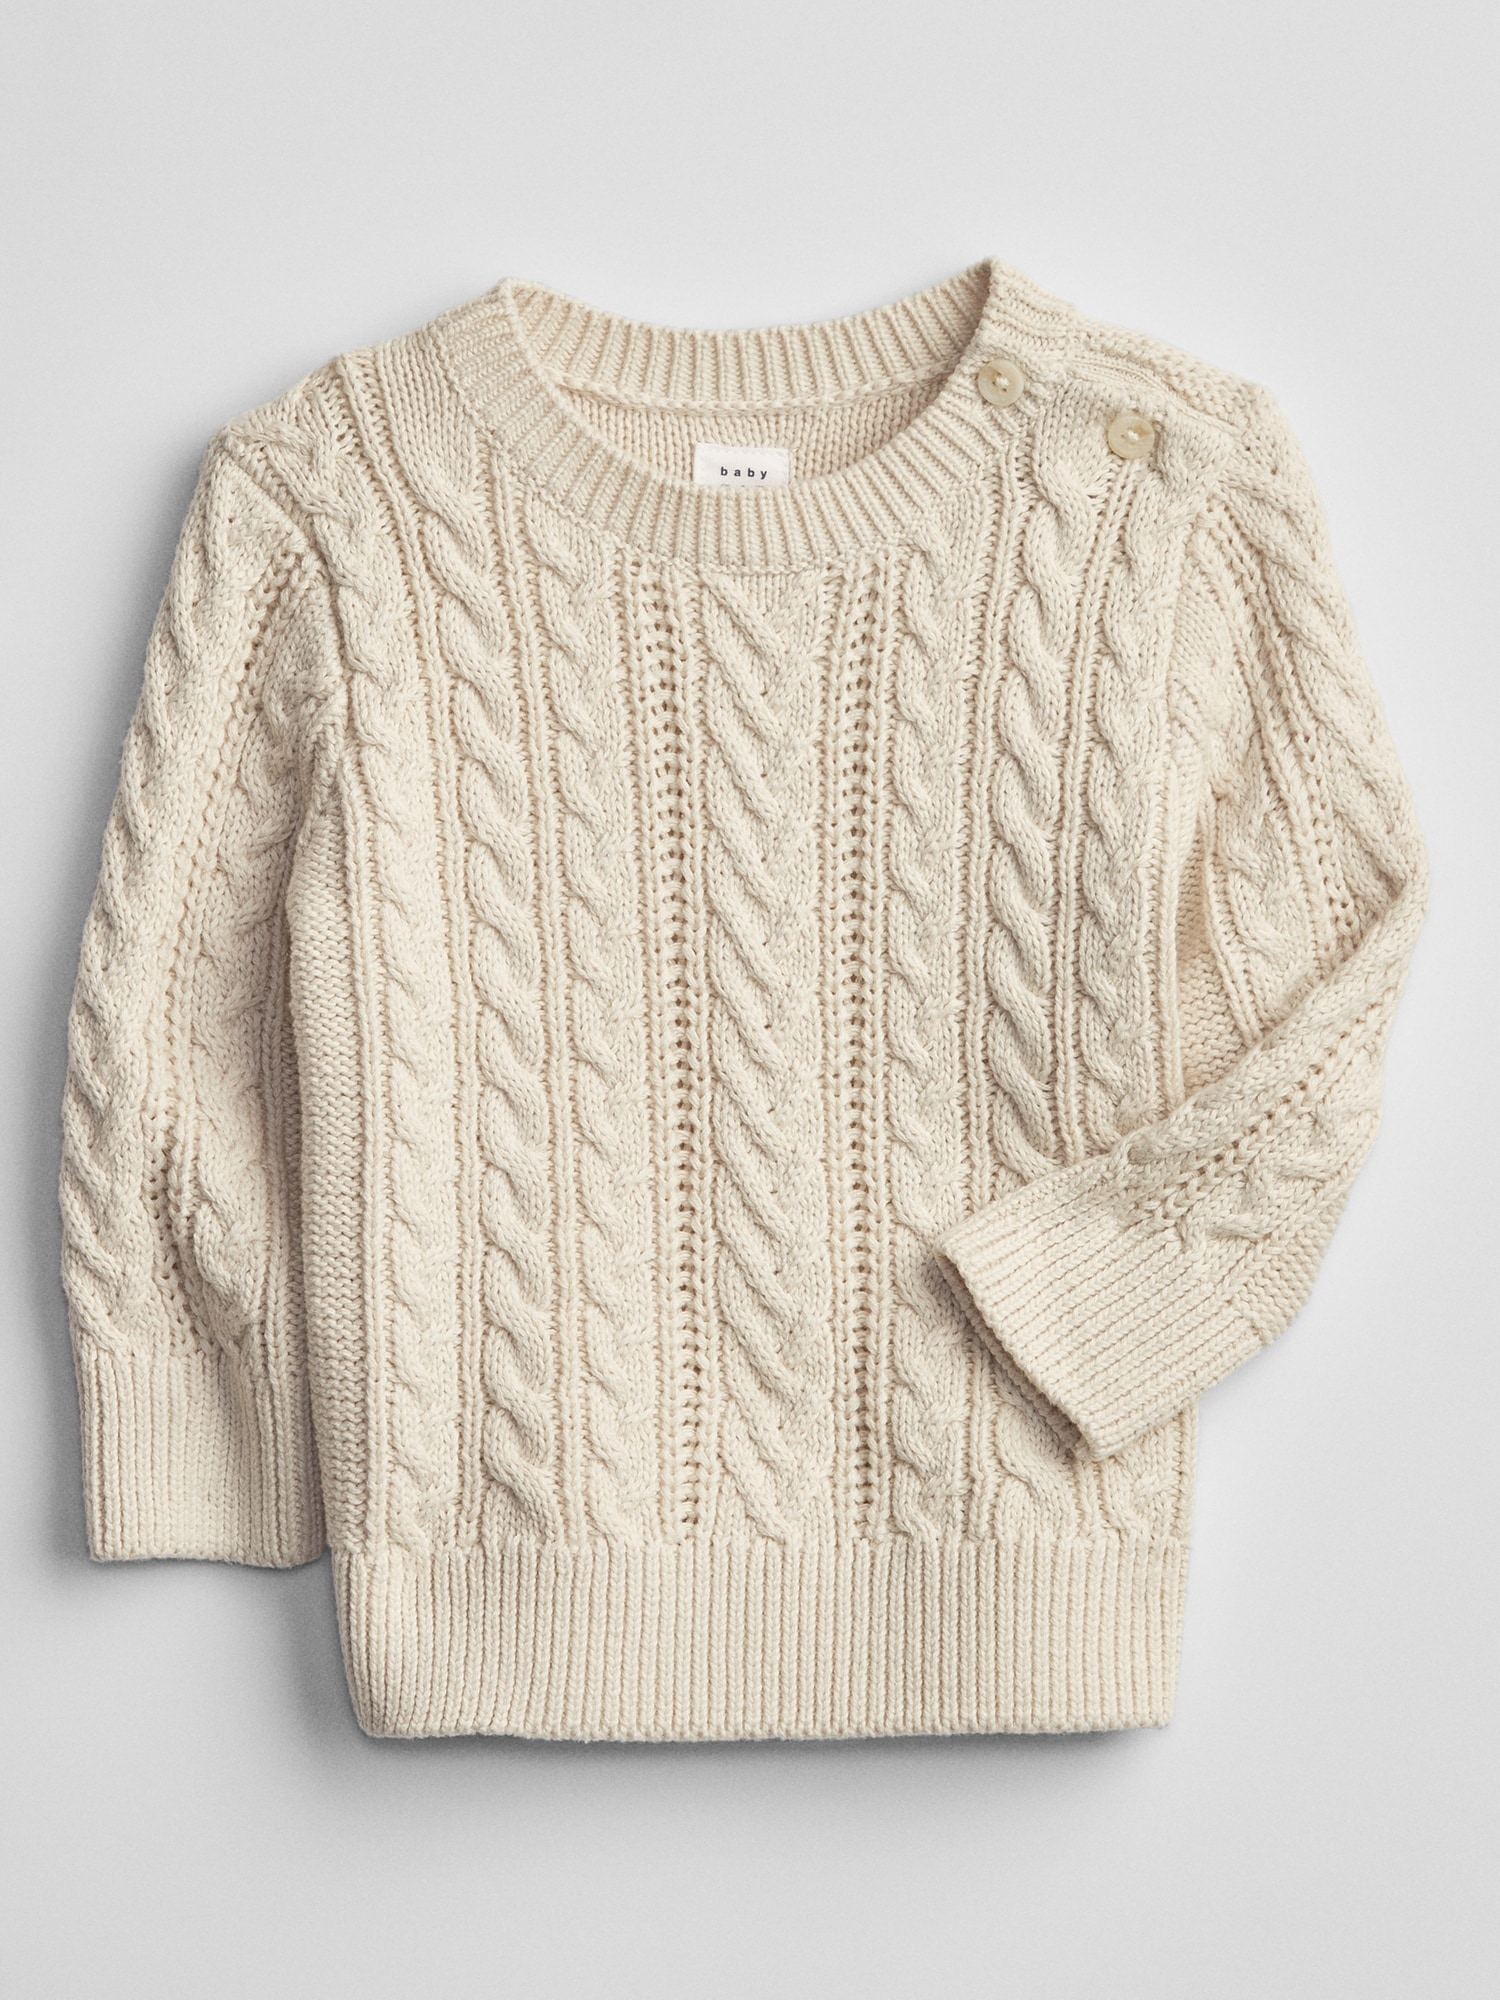 Baby Cable-Knit Sweater | Gap Factory